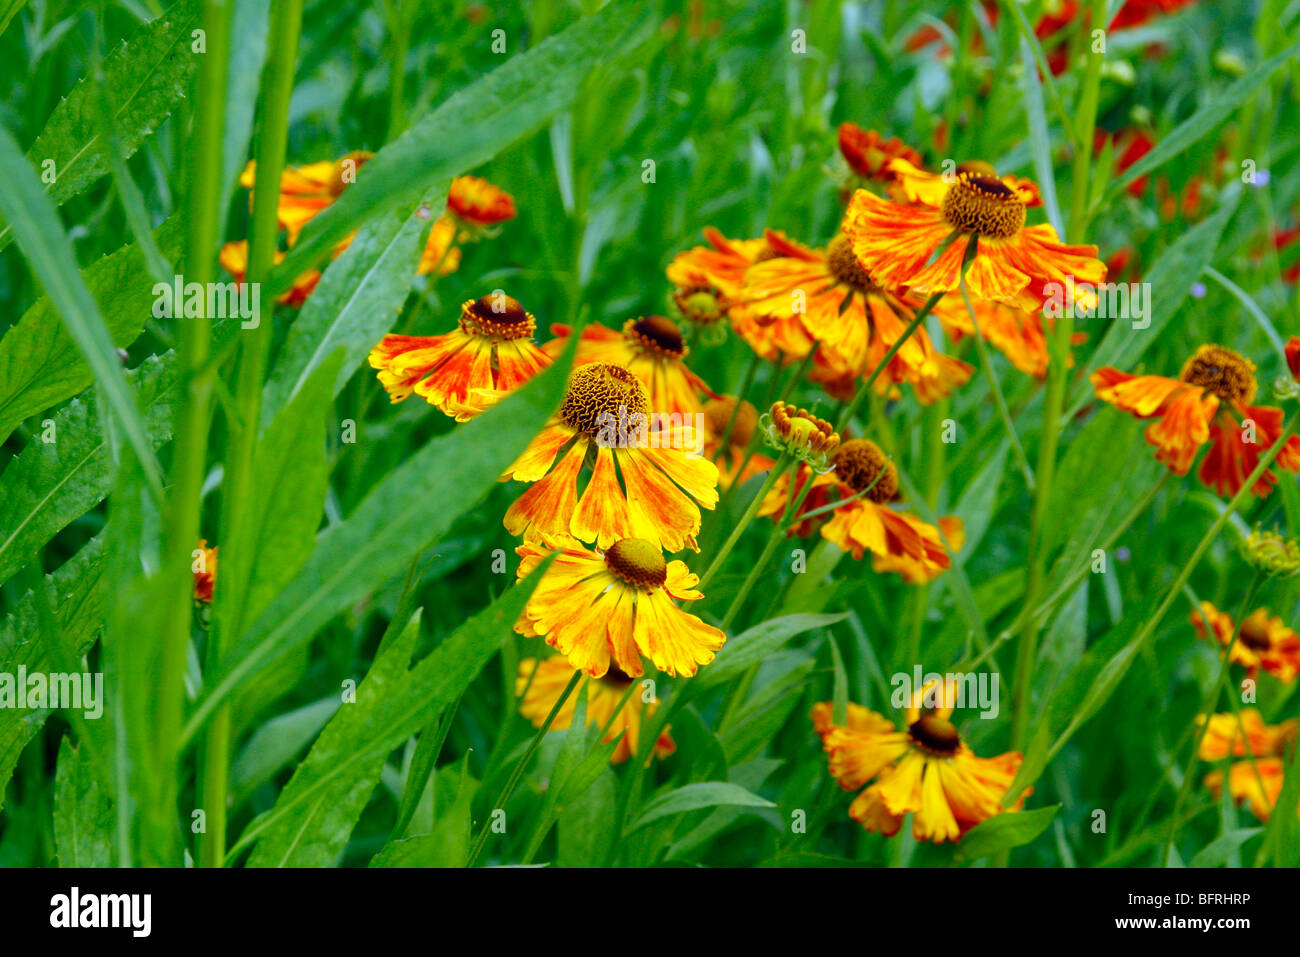 Helenium 'Kupfersprudel' as sold in Netherlands but probably incorrectly named Stock Photo